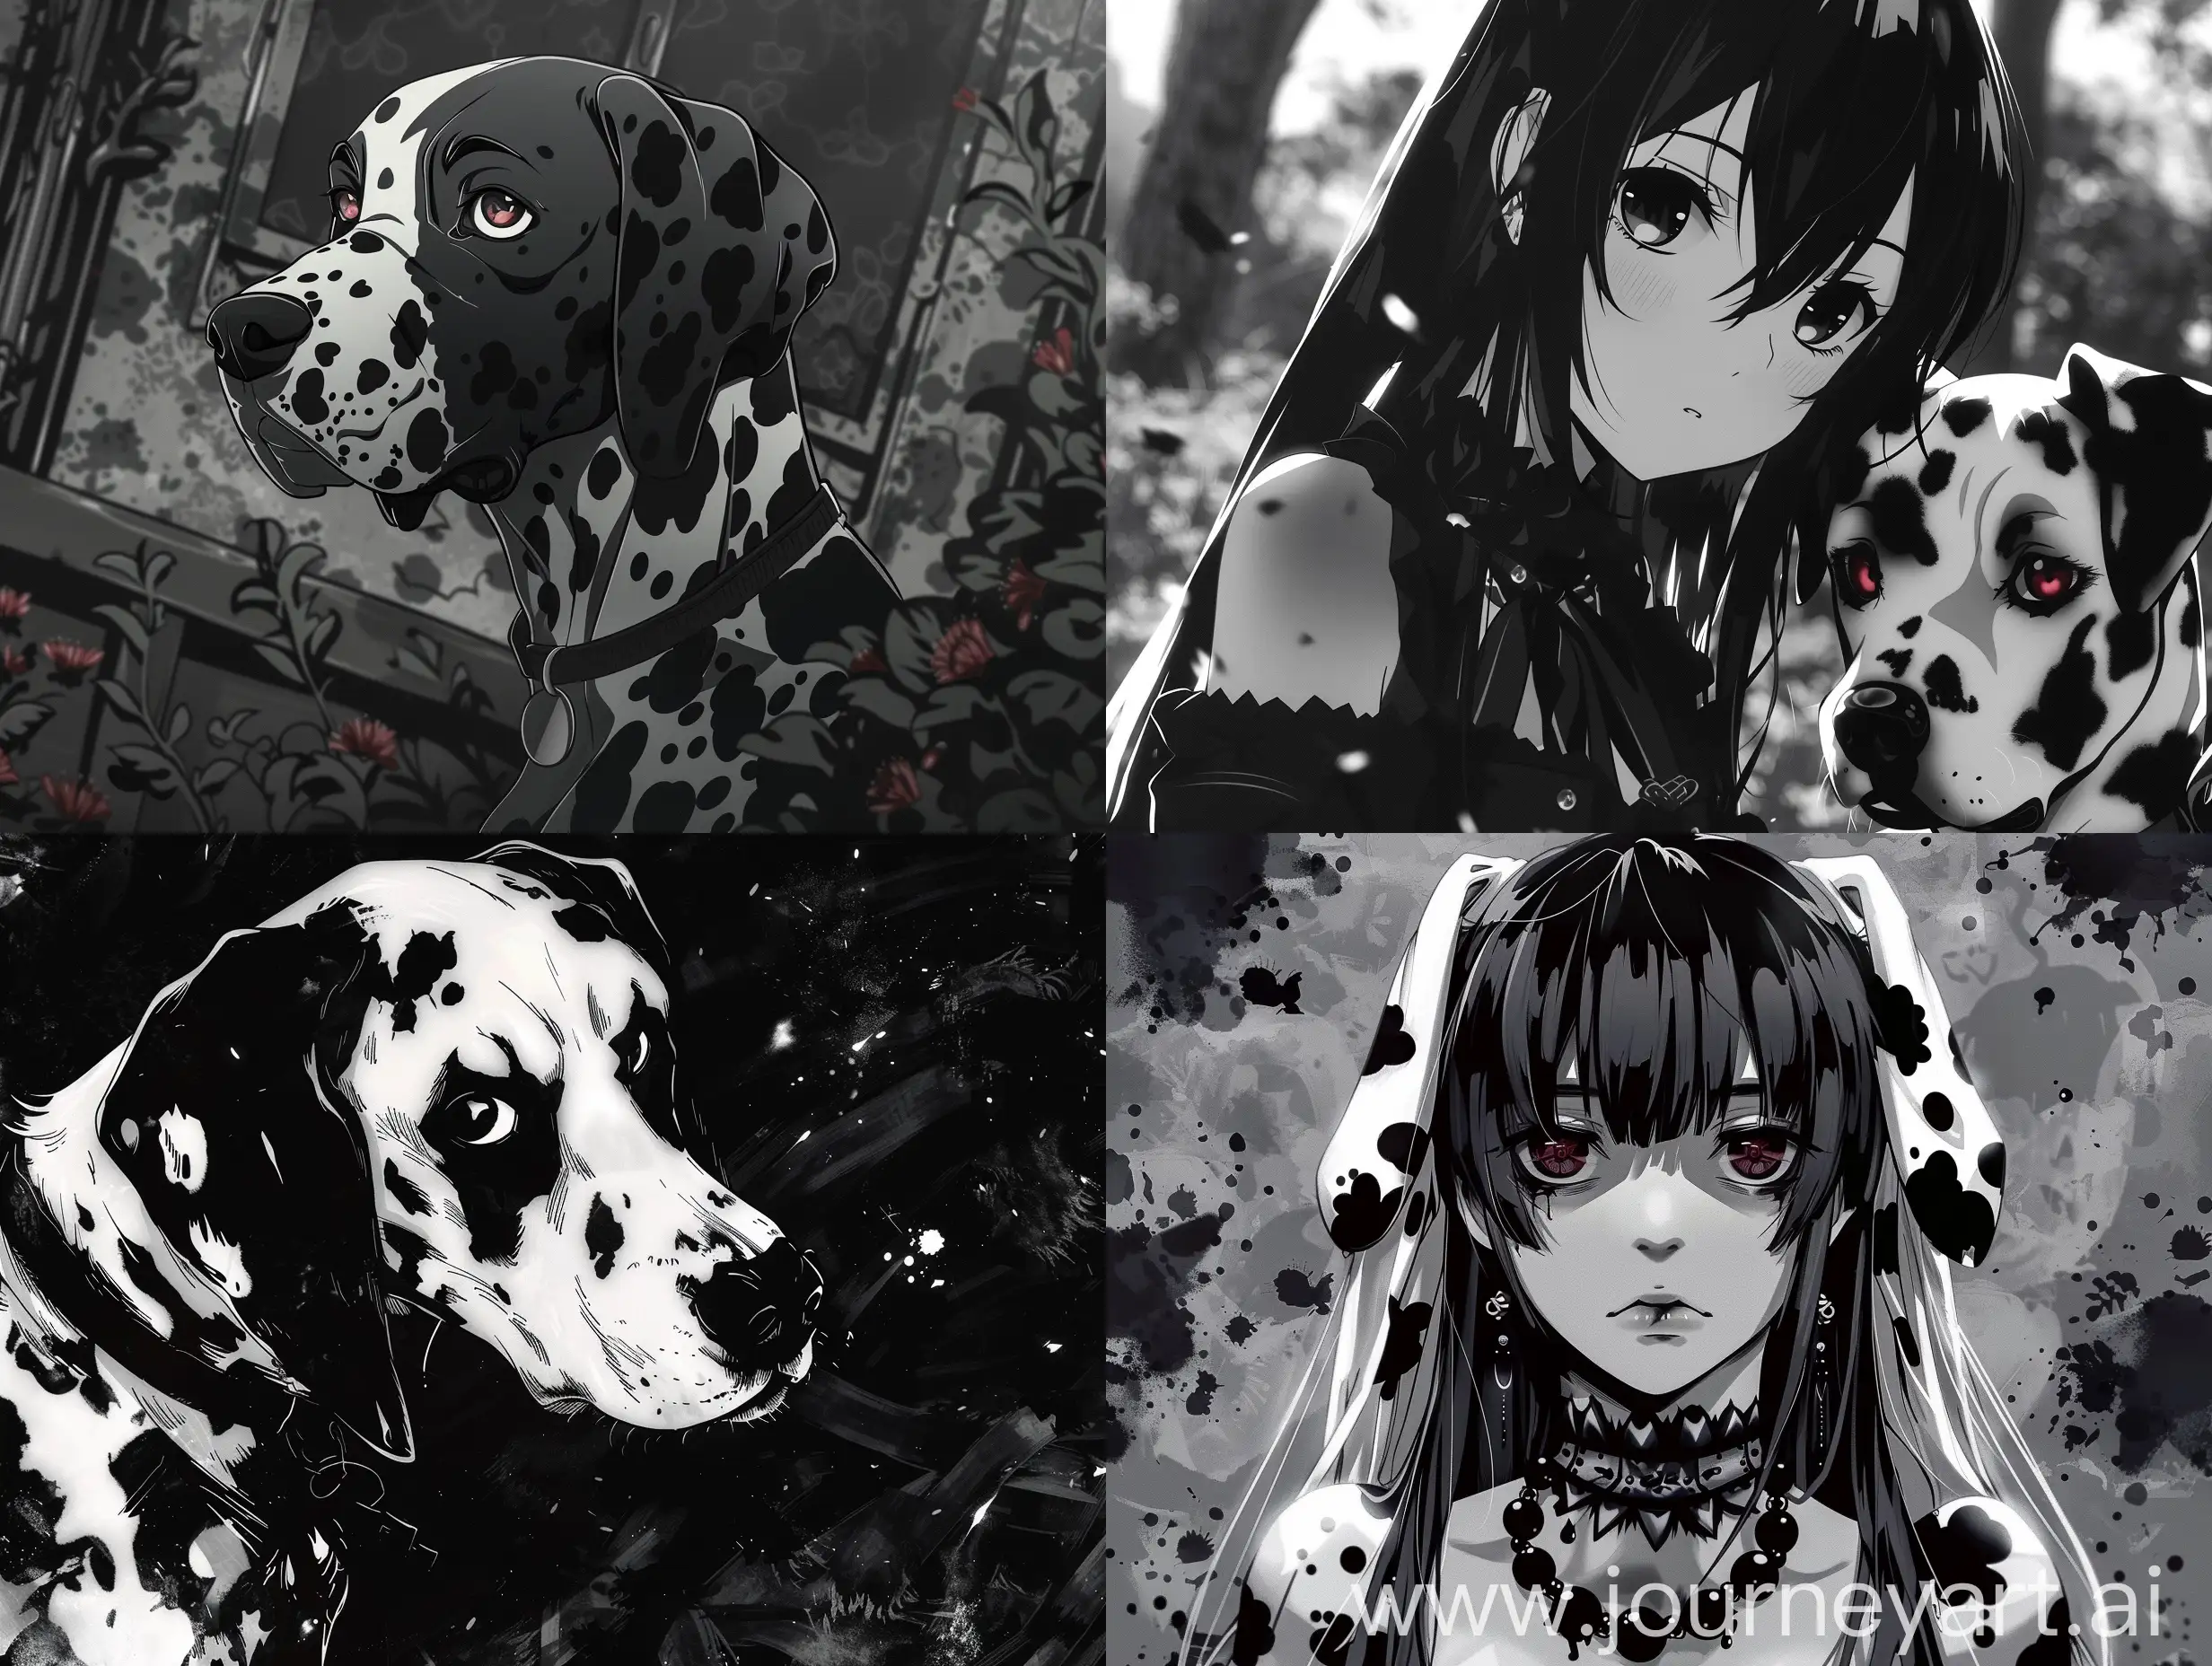 goth high quality background, anime style, 4K, unity or unreal engine style, new anime, Dalmatian style, black, white